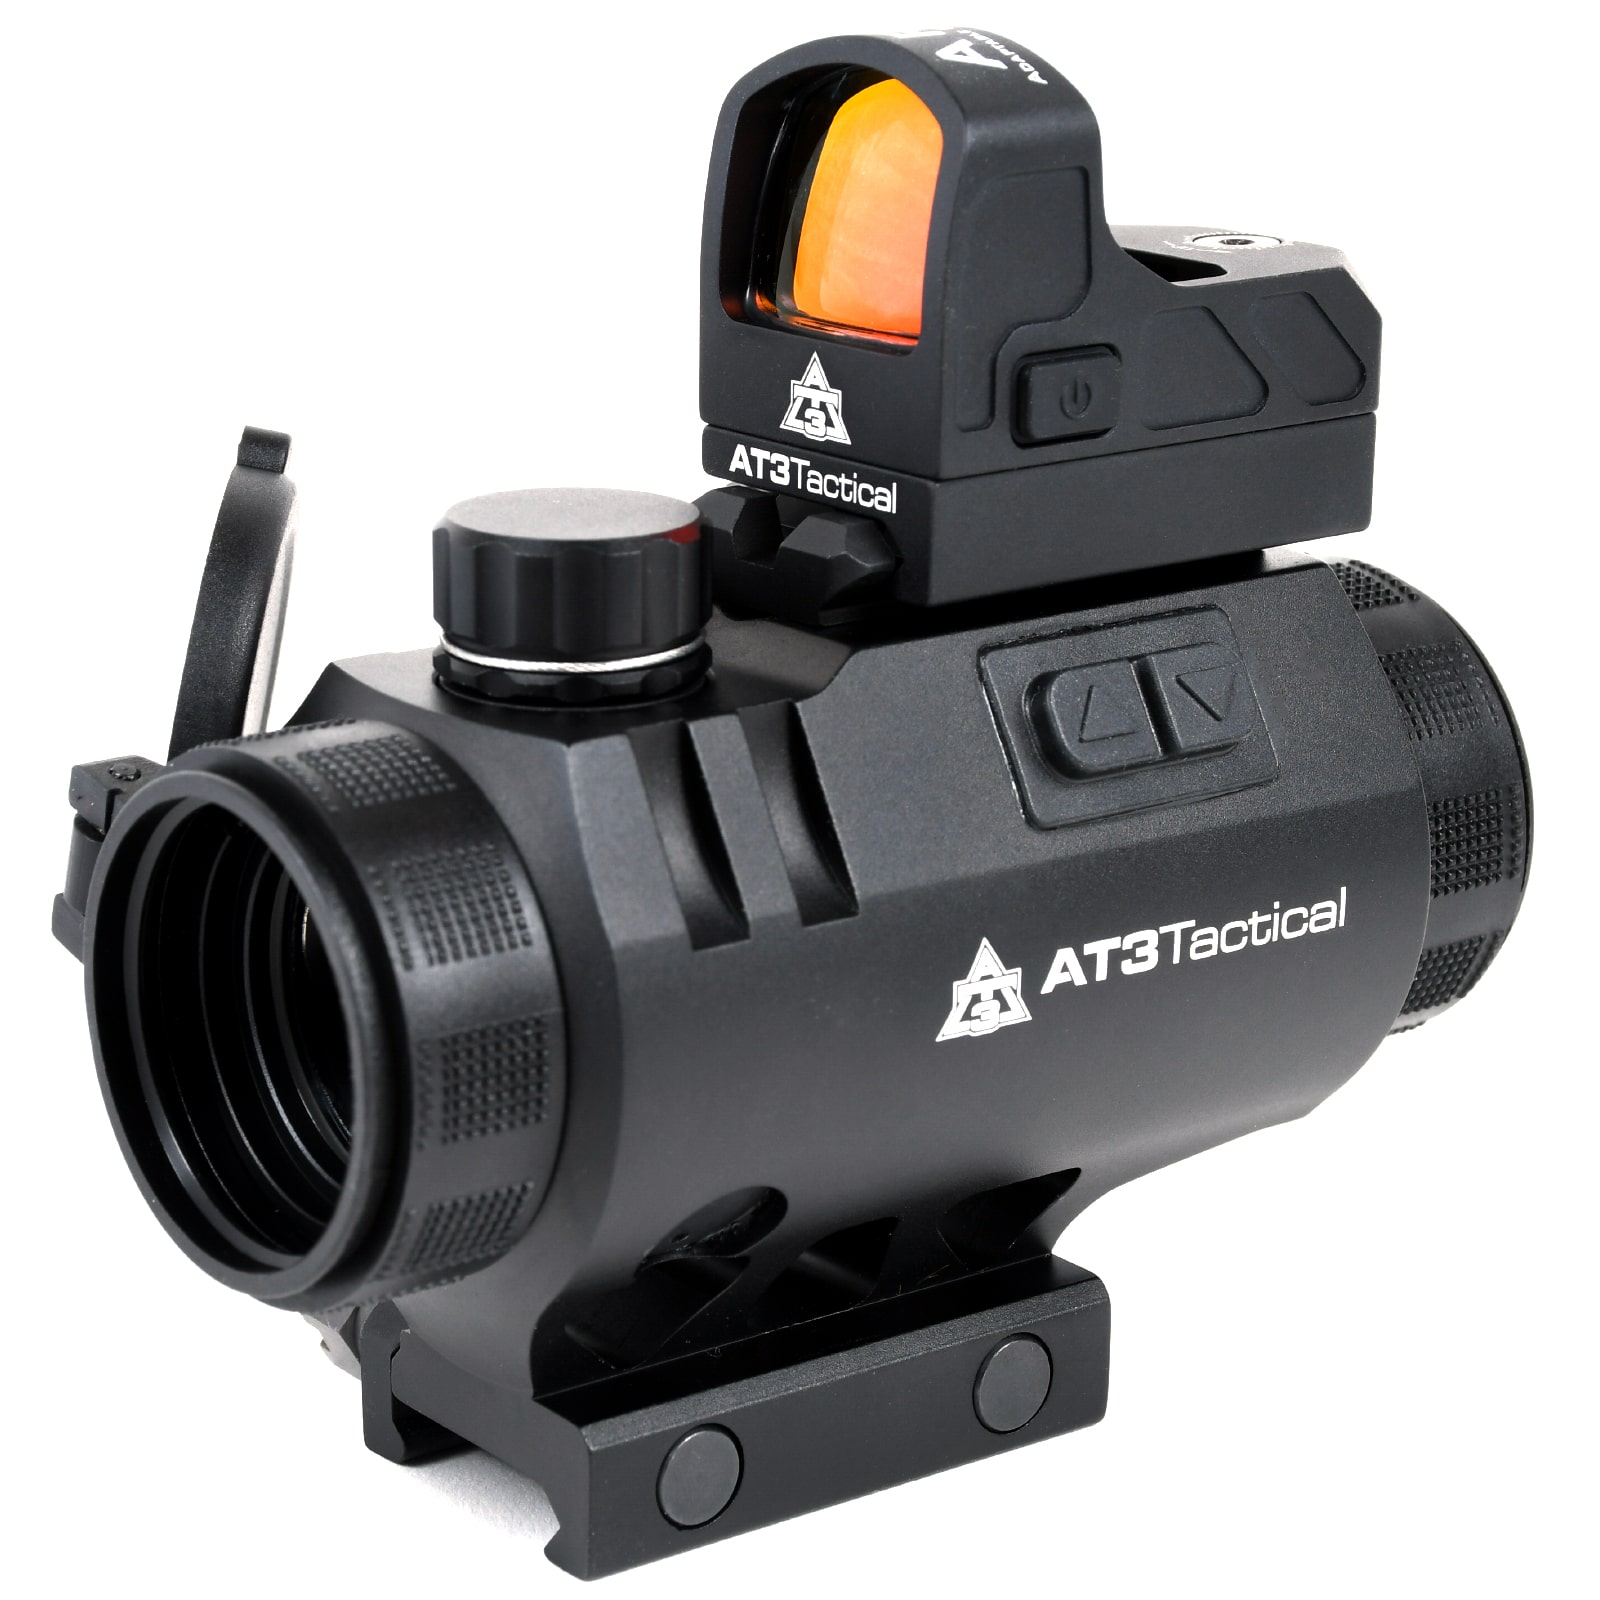 AT3 3xP 3x Prism Scope with ARO Micro Red Dot